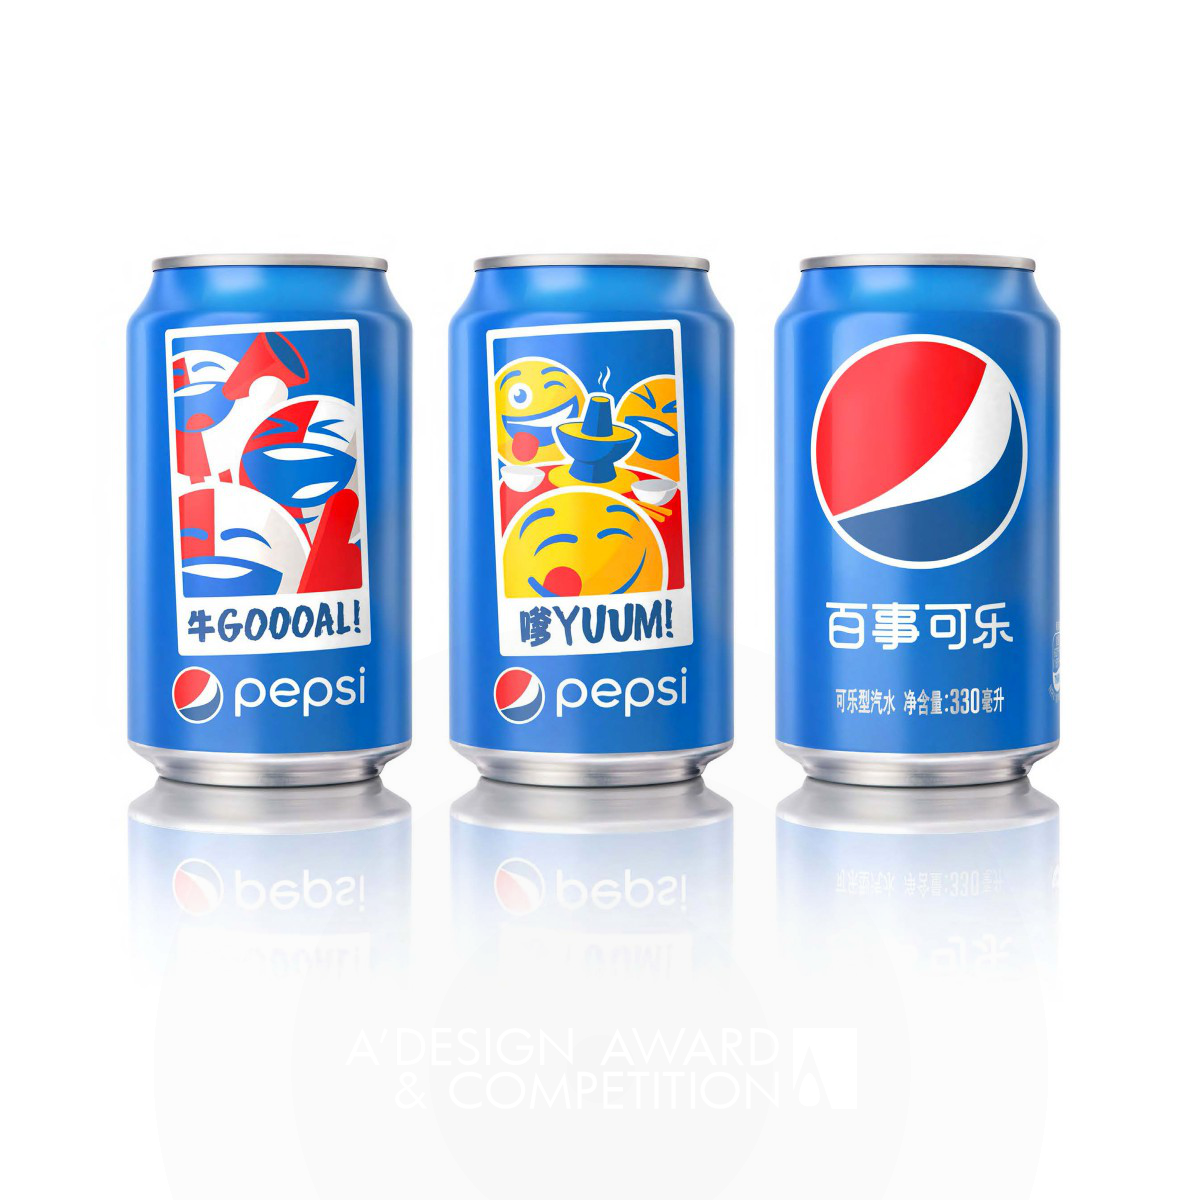 Pepsi Moments CHINA Augmented Reality Ltd Ed Cans Campaign